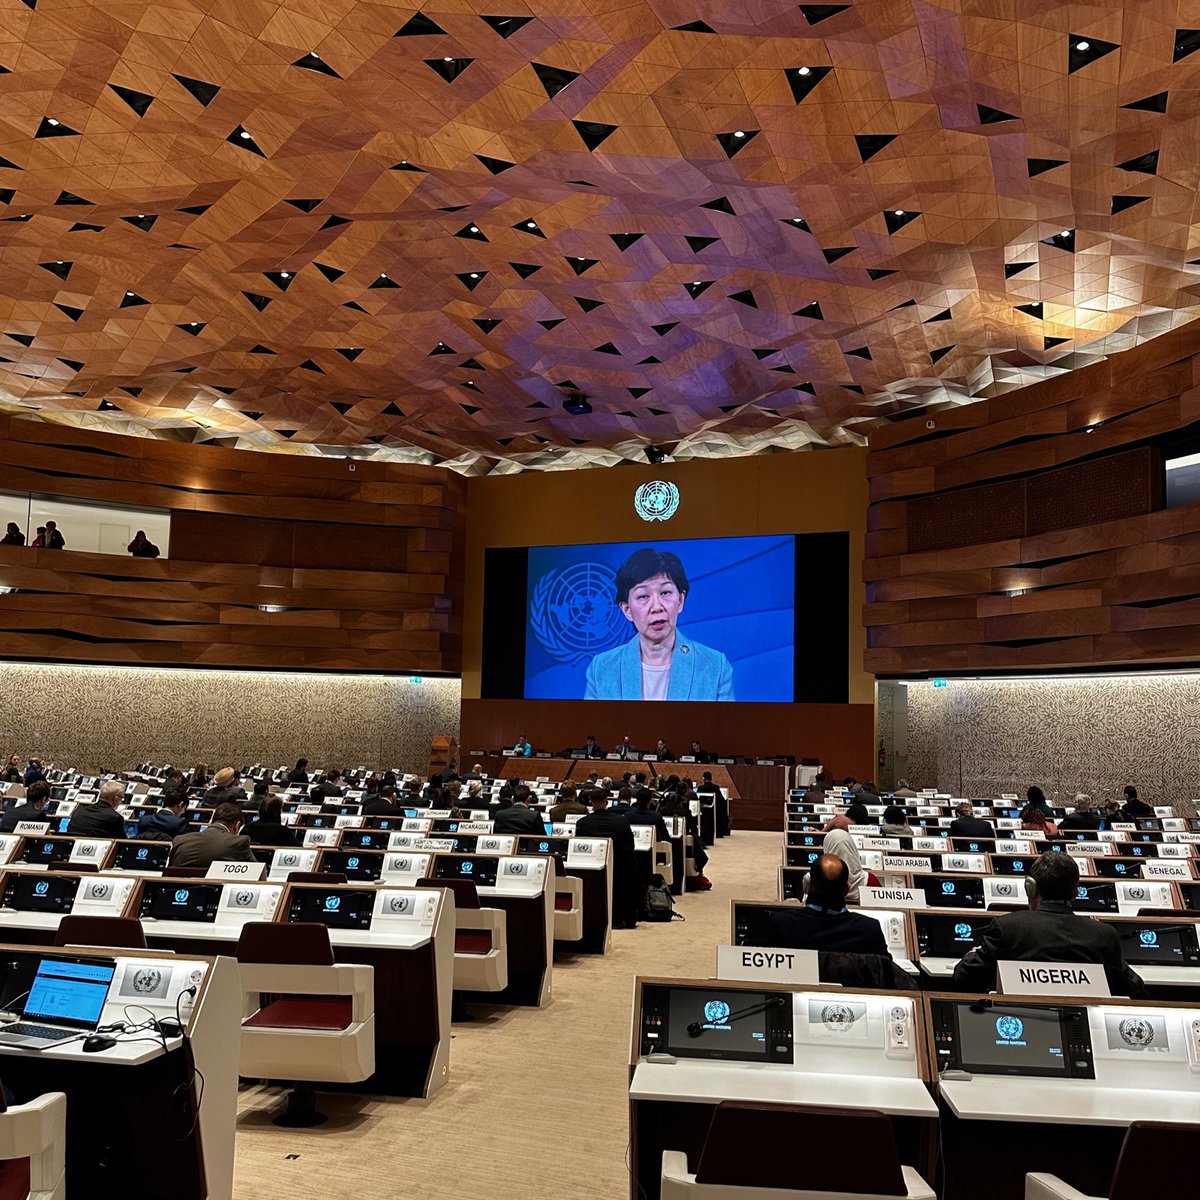 The first 2023 session of the GGE on emerging technologies in the area of LAWS started this morning in Geneva. 🇺🇳 #CCWUN #disarmament #GGEonLAWS 

▶️ Participants listened to a video-statement by HR for Disarmament Affairs, Ms. Izumi Nakamitsu.